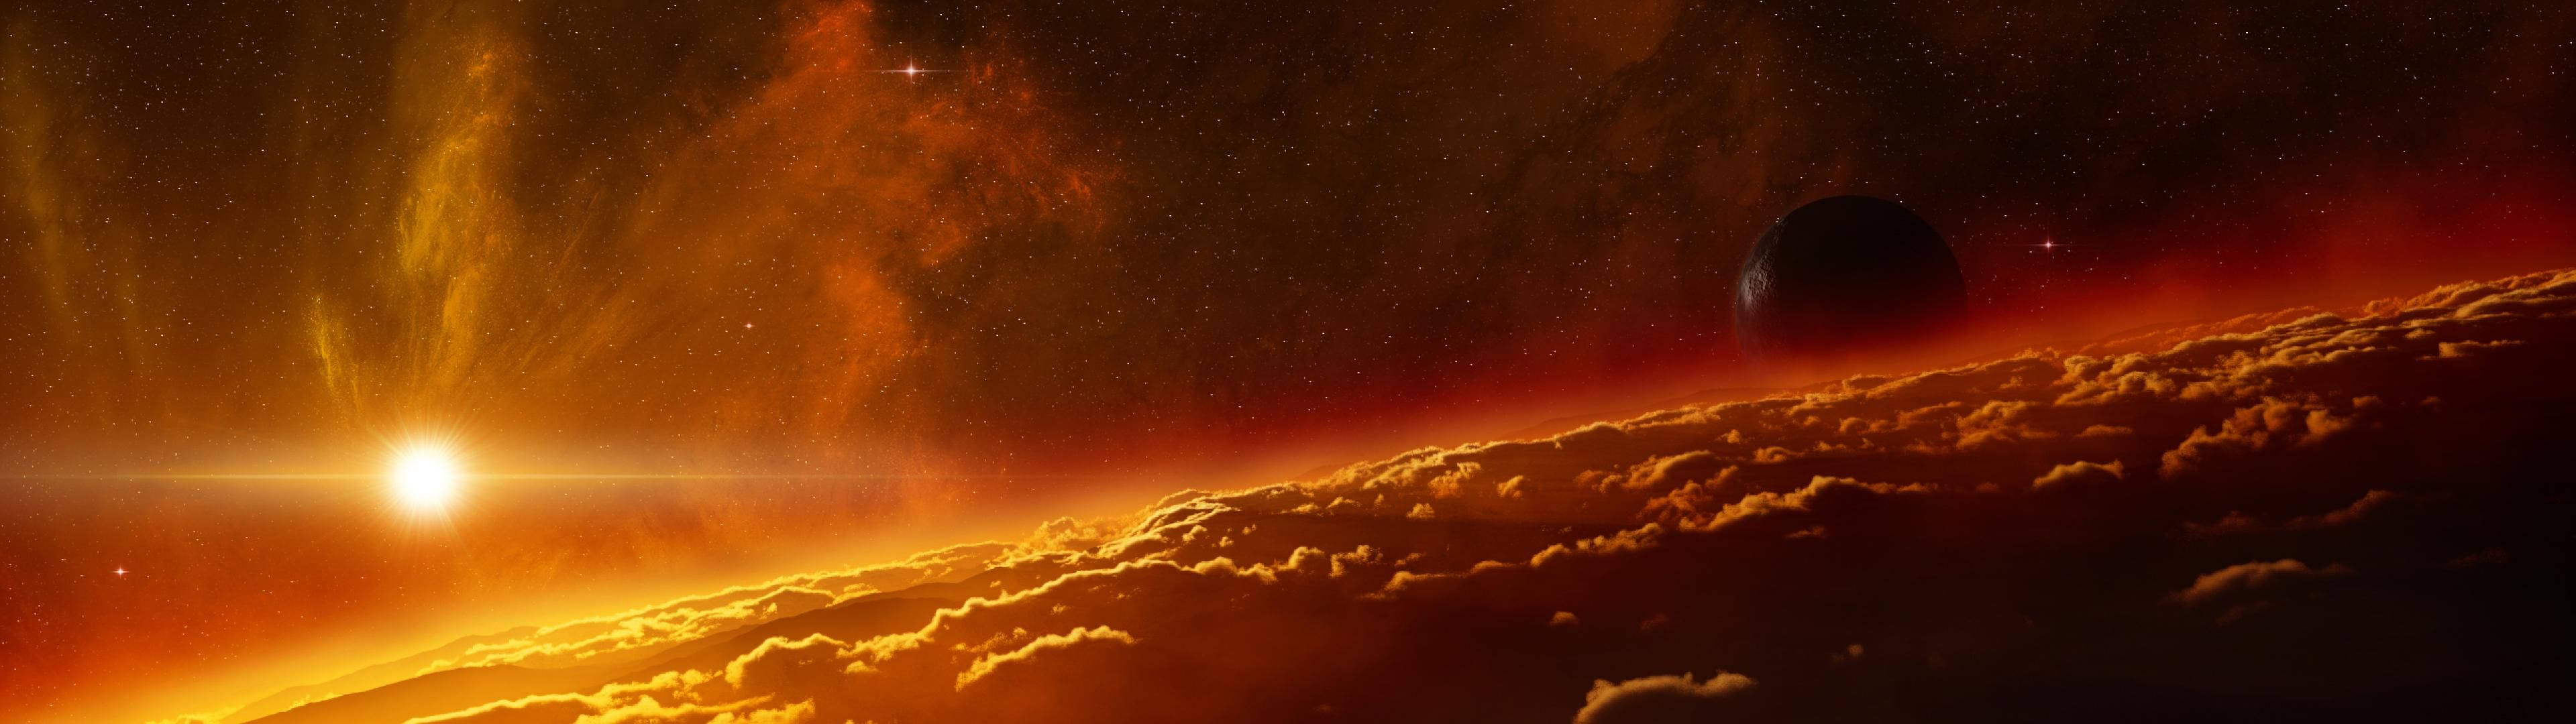 3840X1080 Widescreen Wallpaper and Background